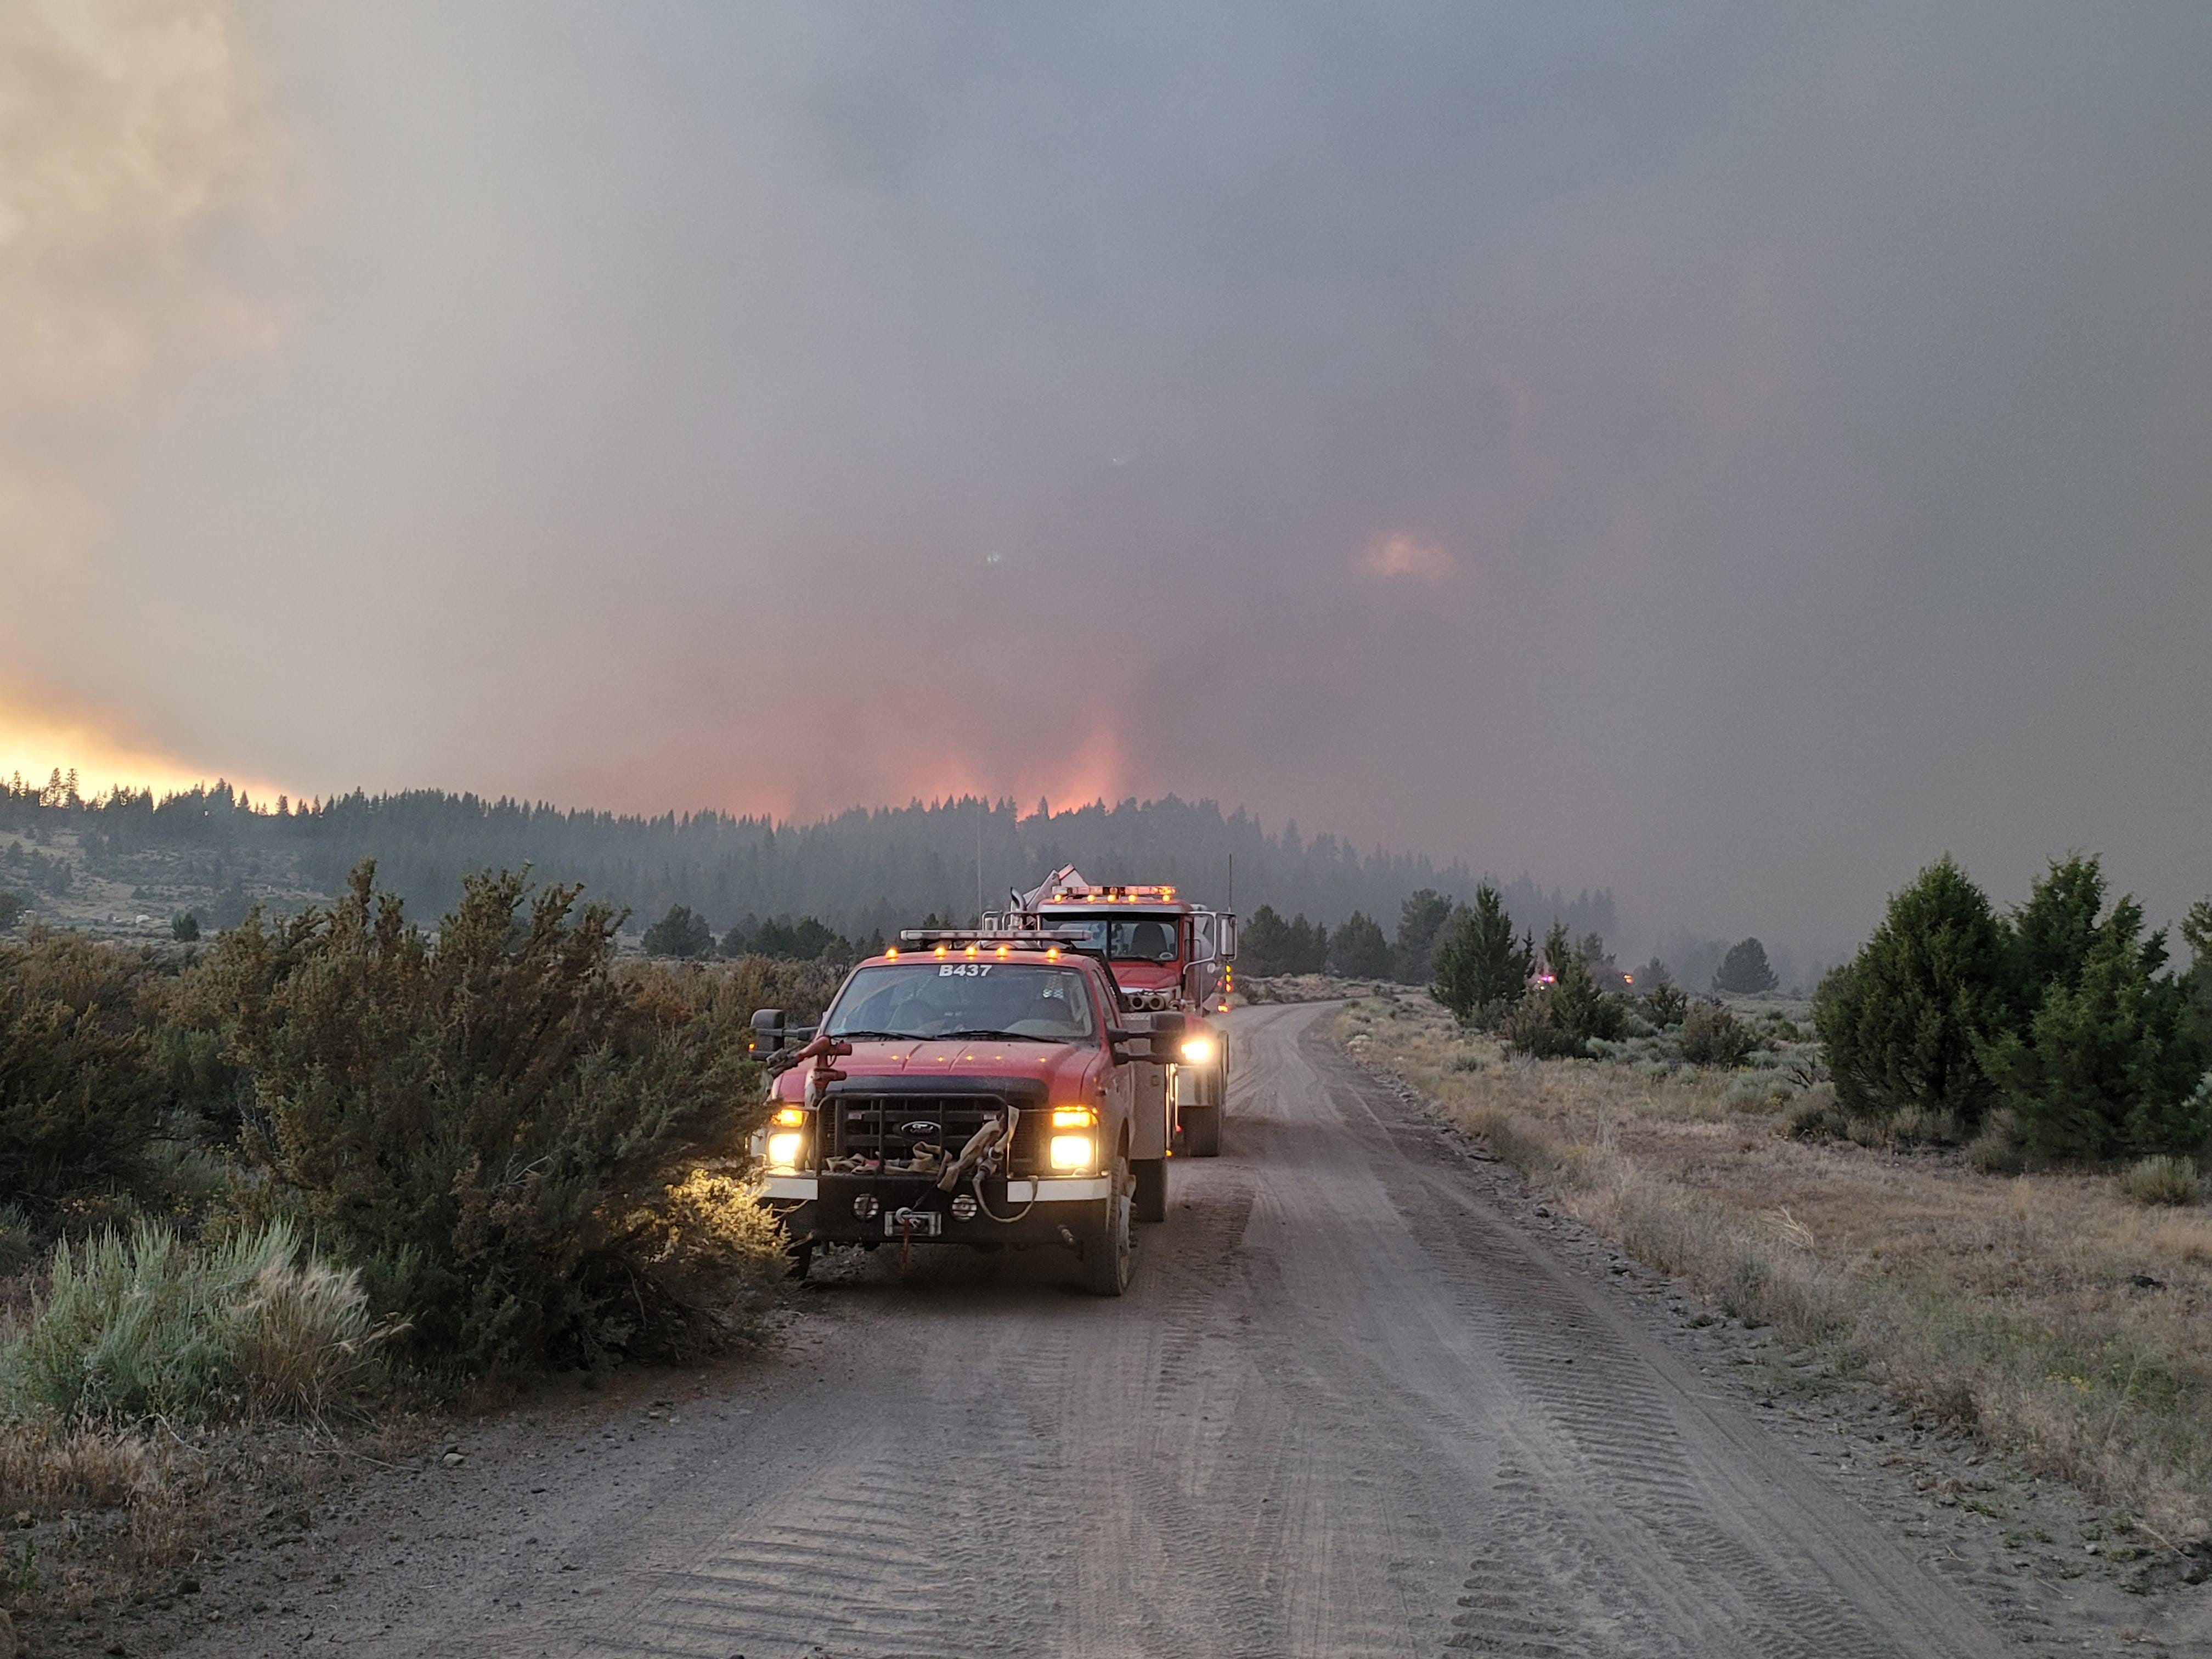 BLY, OREGON - JULY 14: In this handout provided by the USDA Forest Service, the Bootleg Fire burns on July 14, 2021 in Bly, Oregon. The Bootleg Fire has has spread over 212,377 acres, making it the largest among the dozens of blazes burning in the western U.S. fueled by record temperatures and drought.